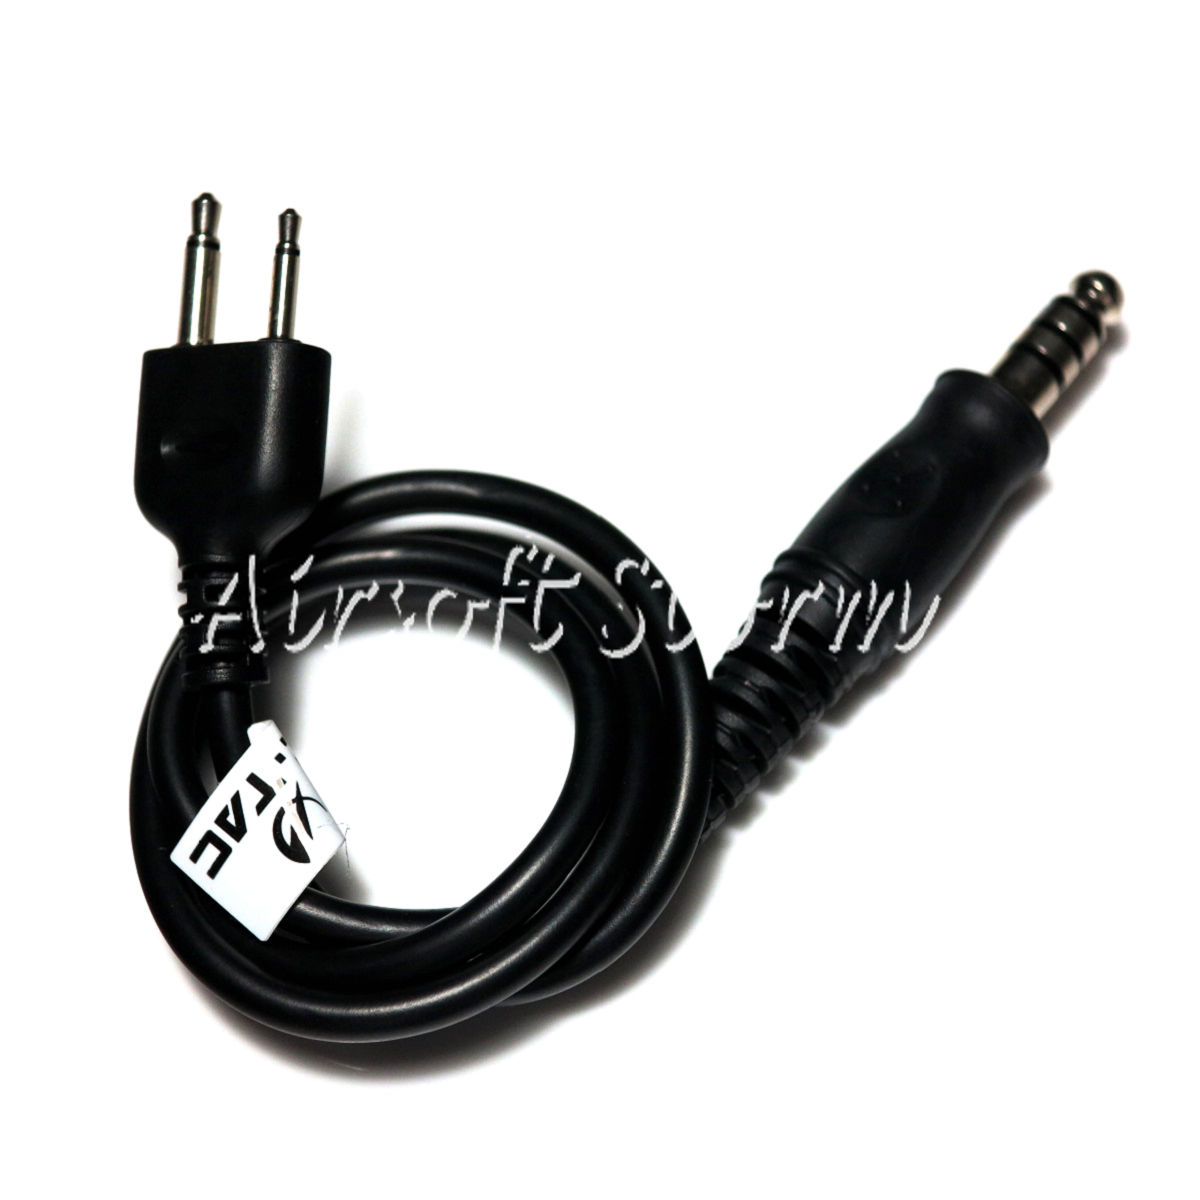 Airsoft SWAT Communications Gear Z Tactical Electronic PTT Wire for Motorola 2 Pin Radio